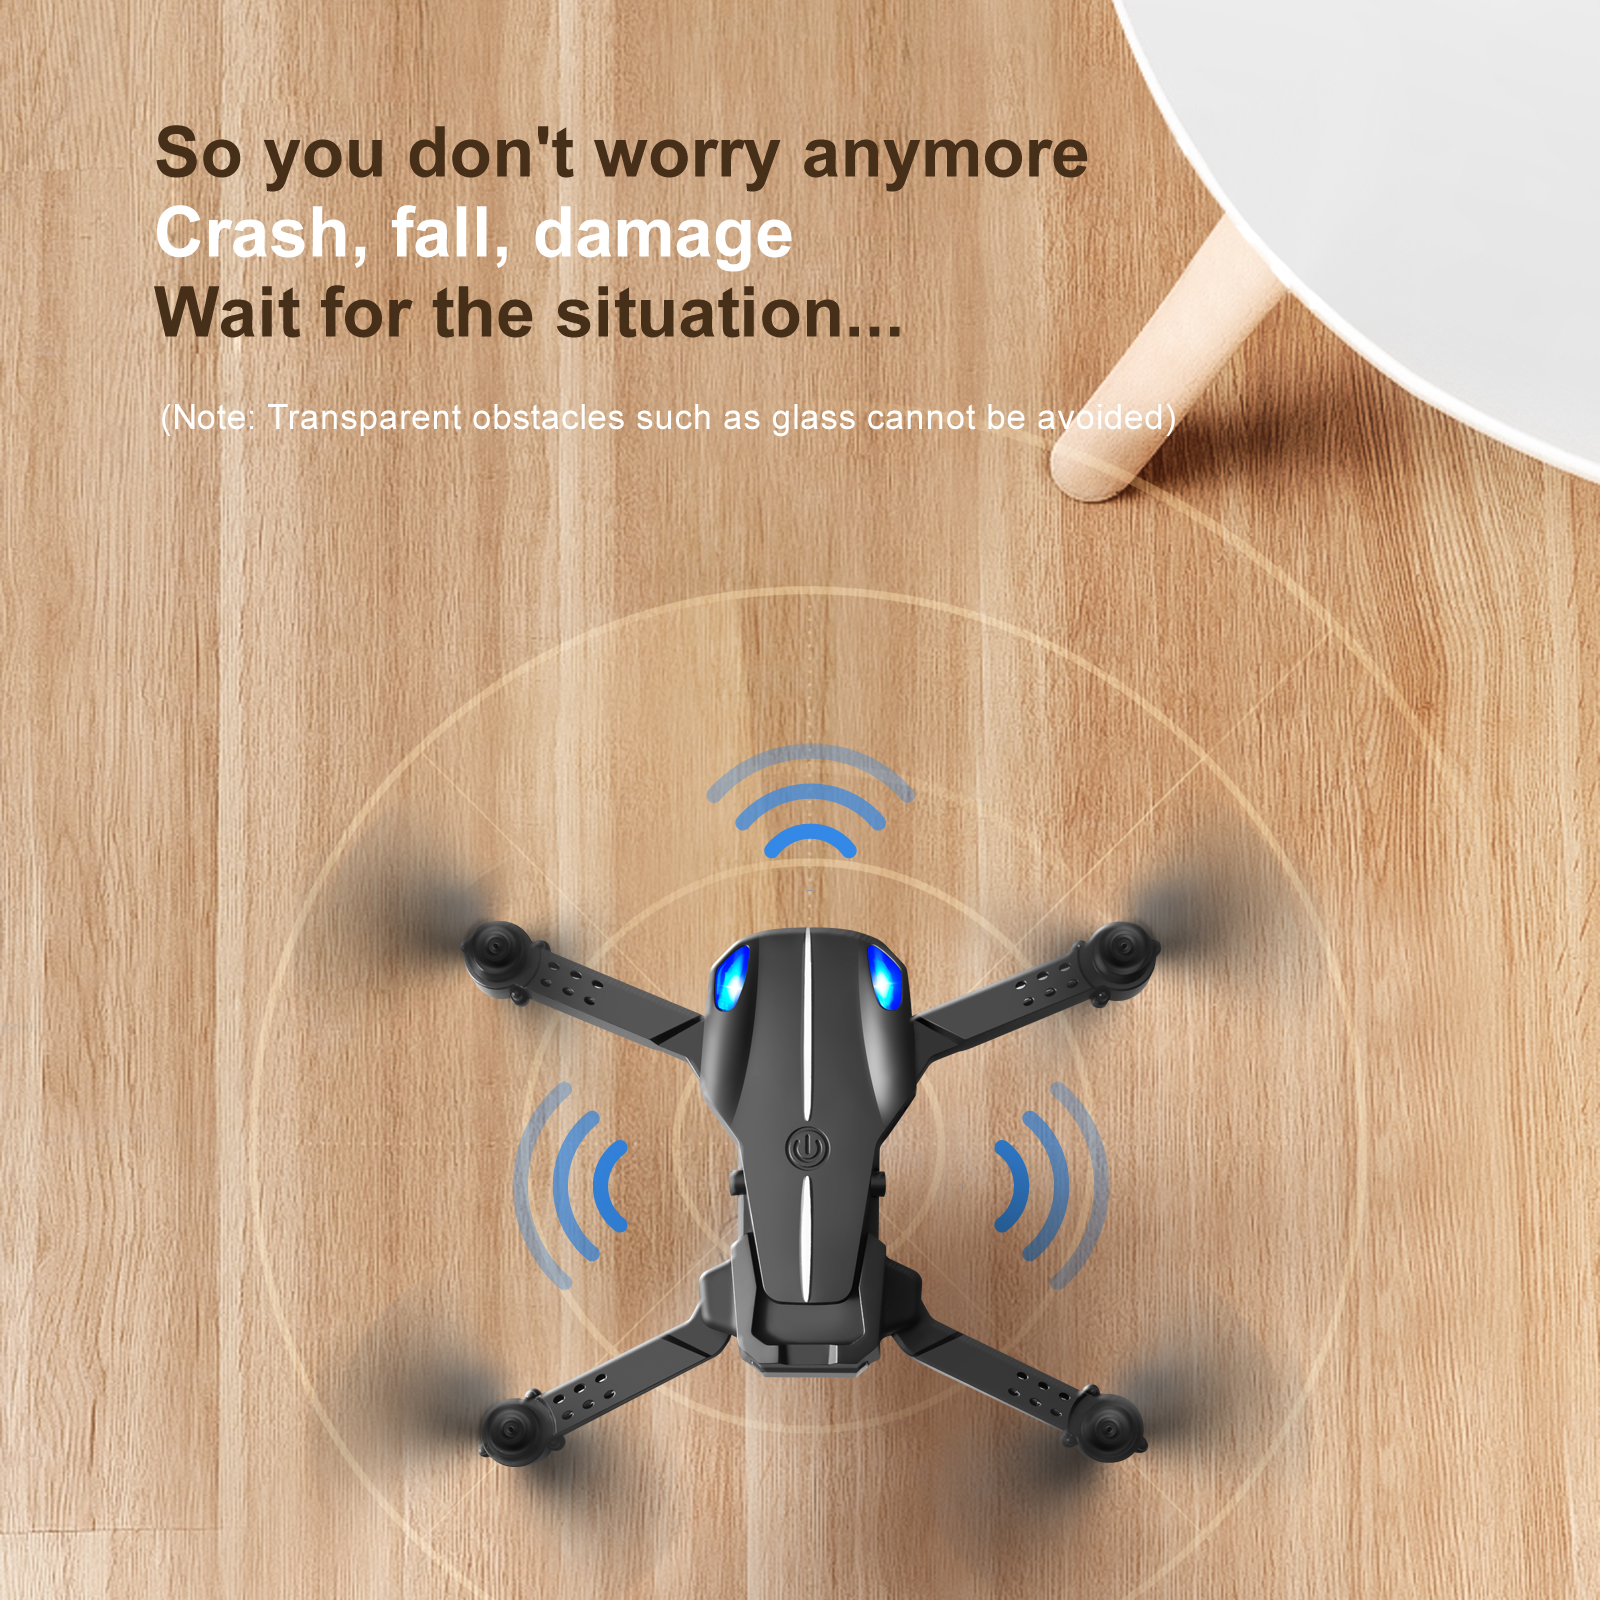 KY907-PRO-Mini-Wifi-FPV-with-4K-HD-Camera-Three-side-Obstacle-Avoidance-Headless-Mode-RC-Drone-Quadc-1906185-4